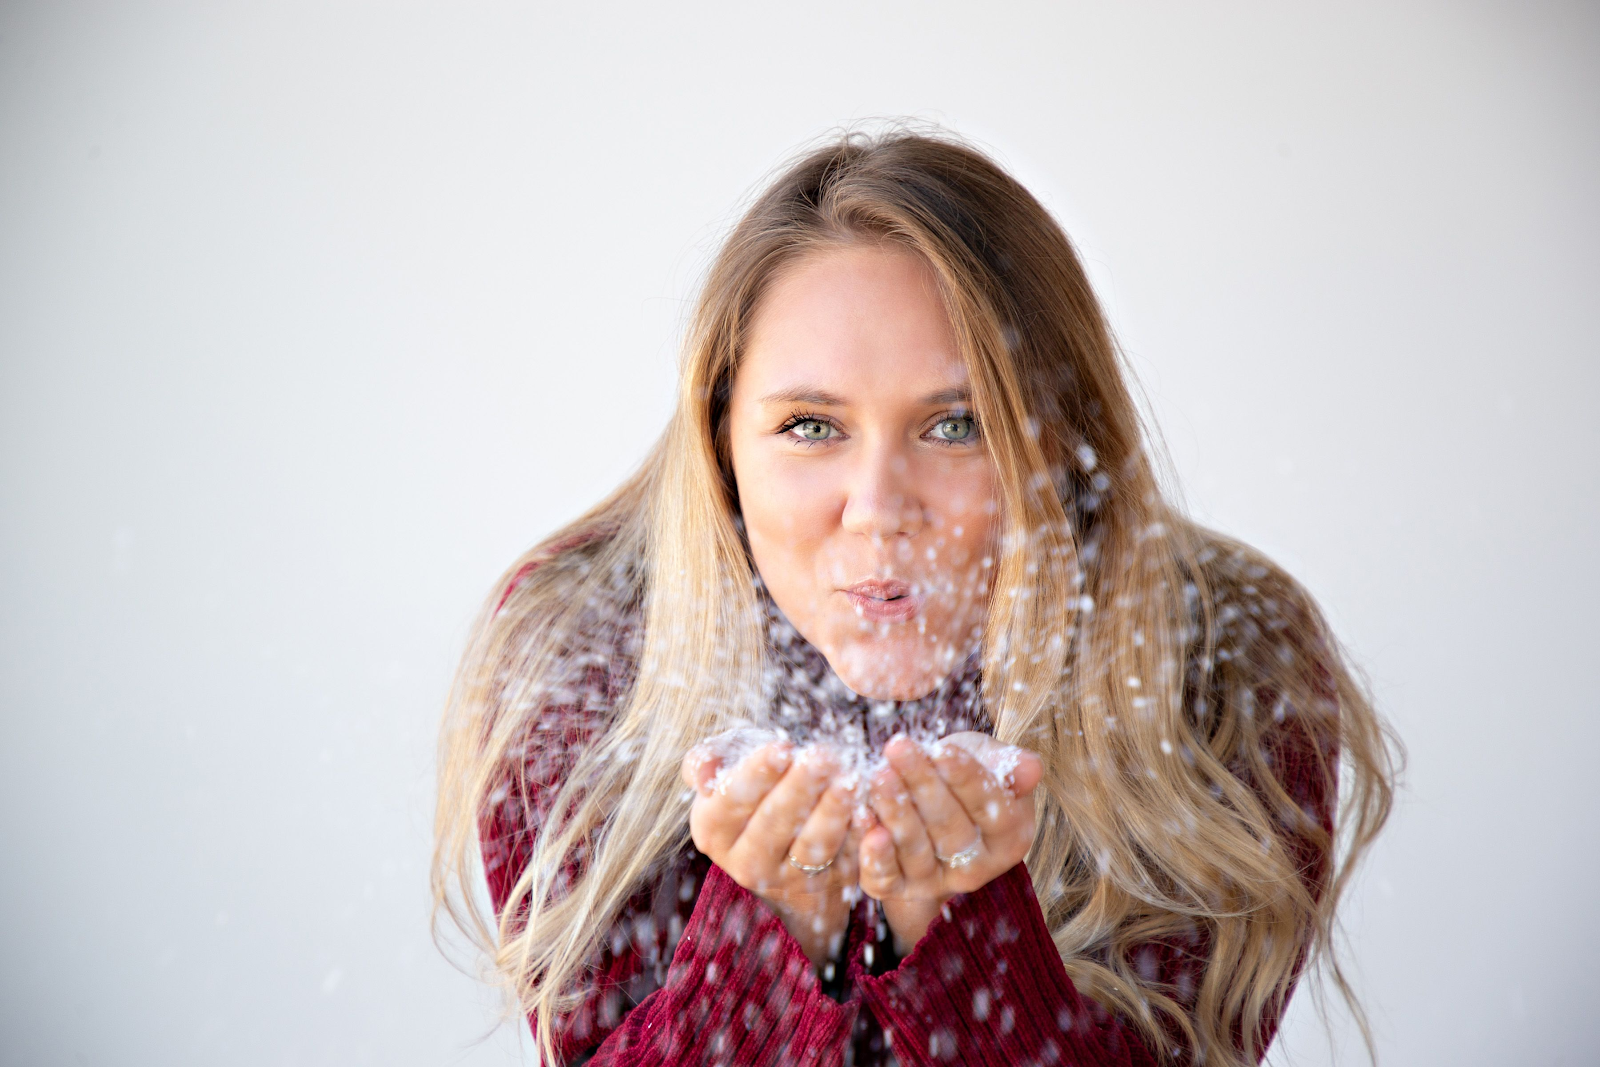 fun christmas card pose of girl blowing snow at the camera in a red turtleneck